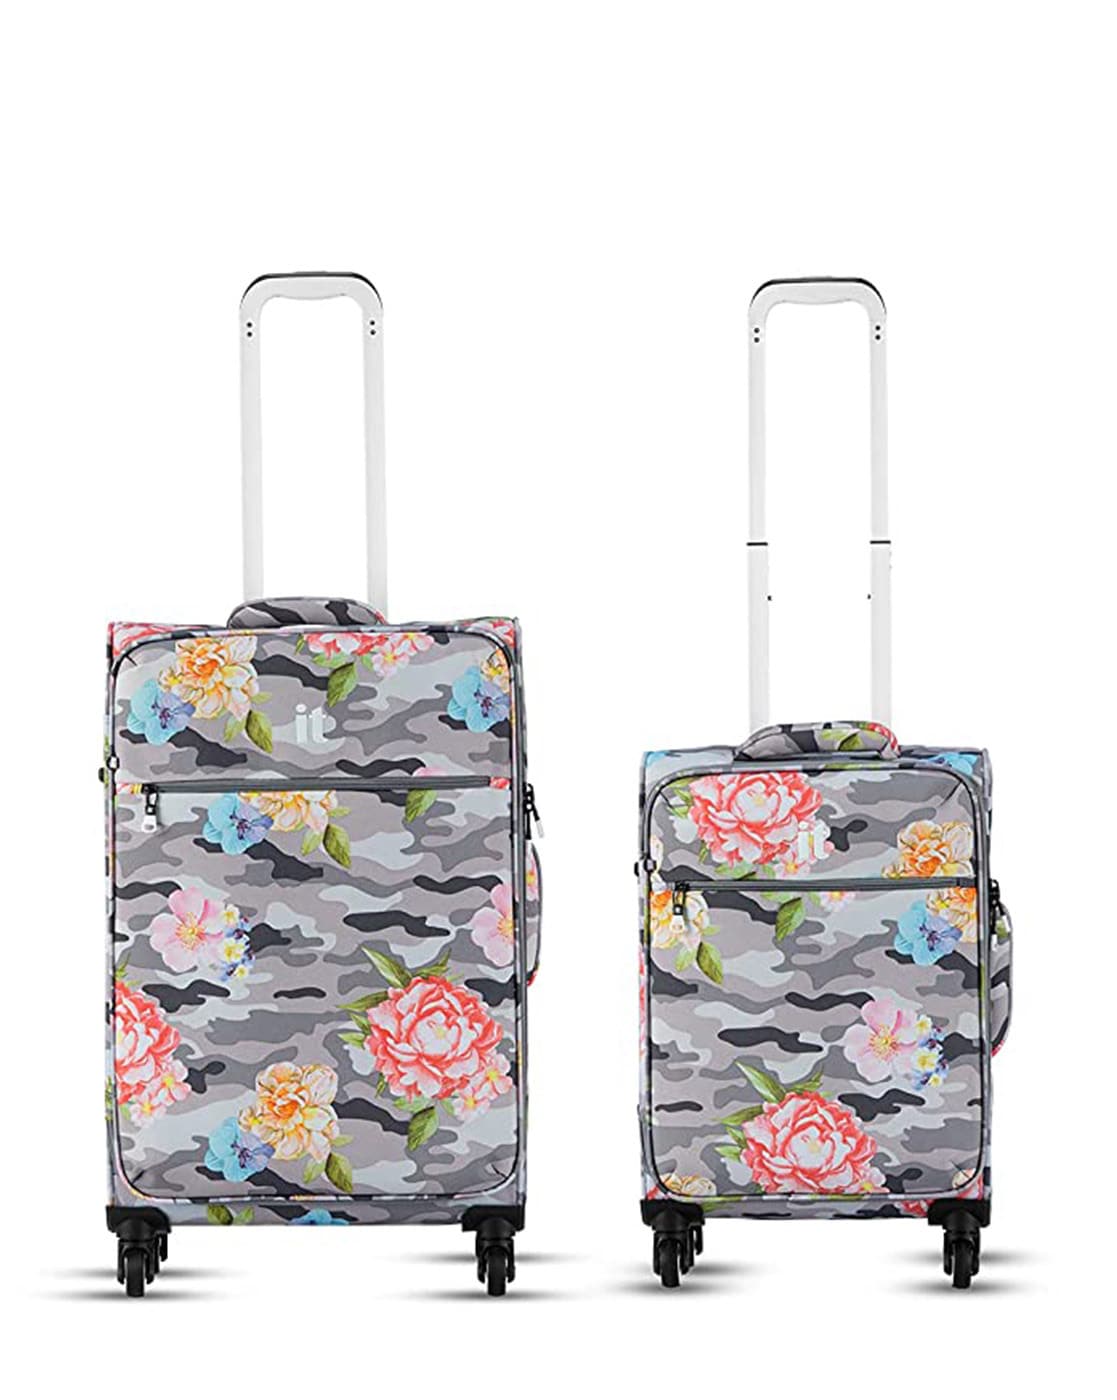 Travel Bags - Upto 50% to 80% OFF on Luggage Trolley, Trolley Bags  Suitcases Online at Best Prices in India | Flipkart.com